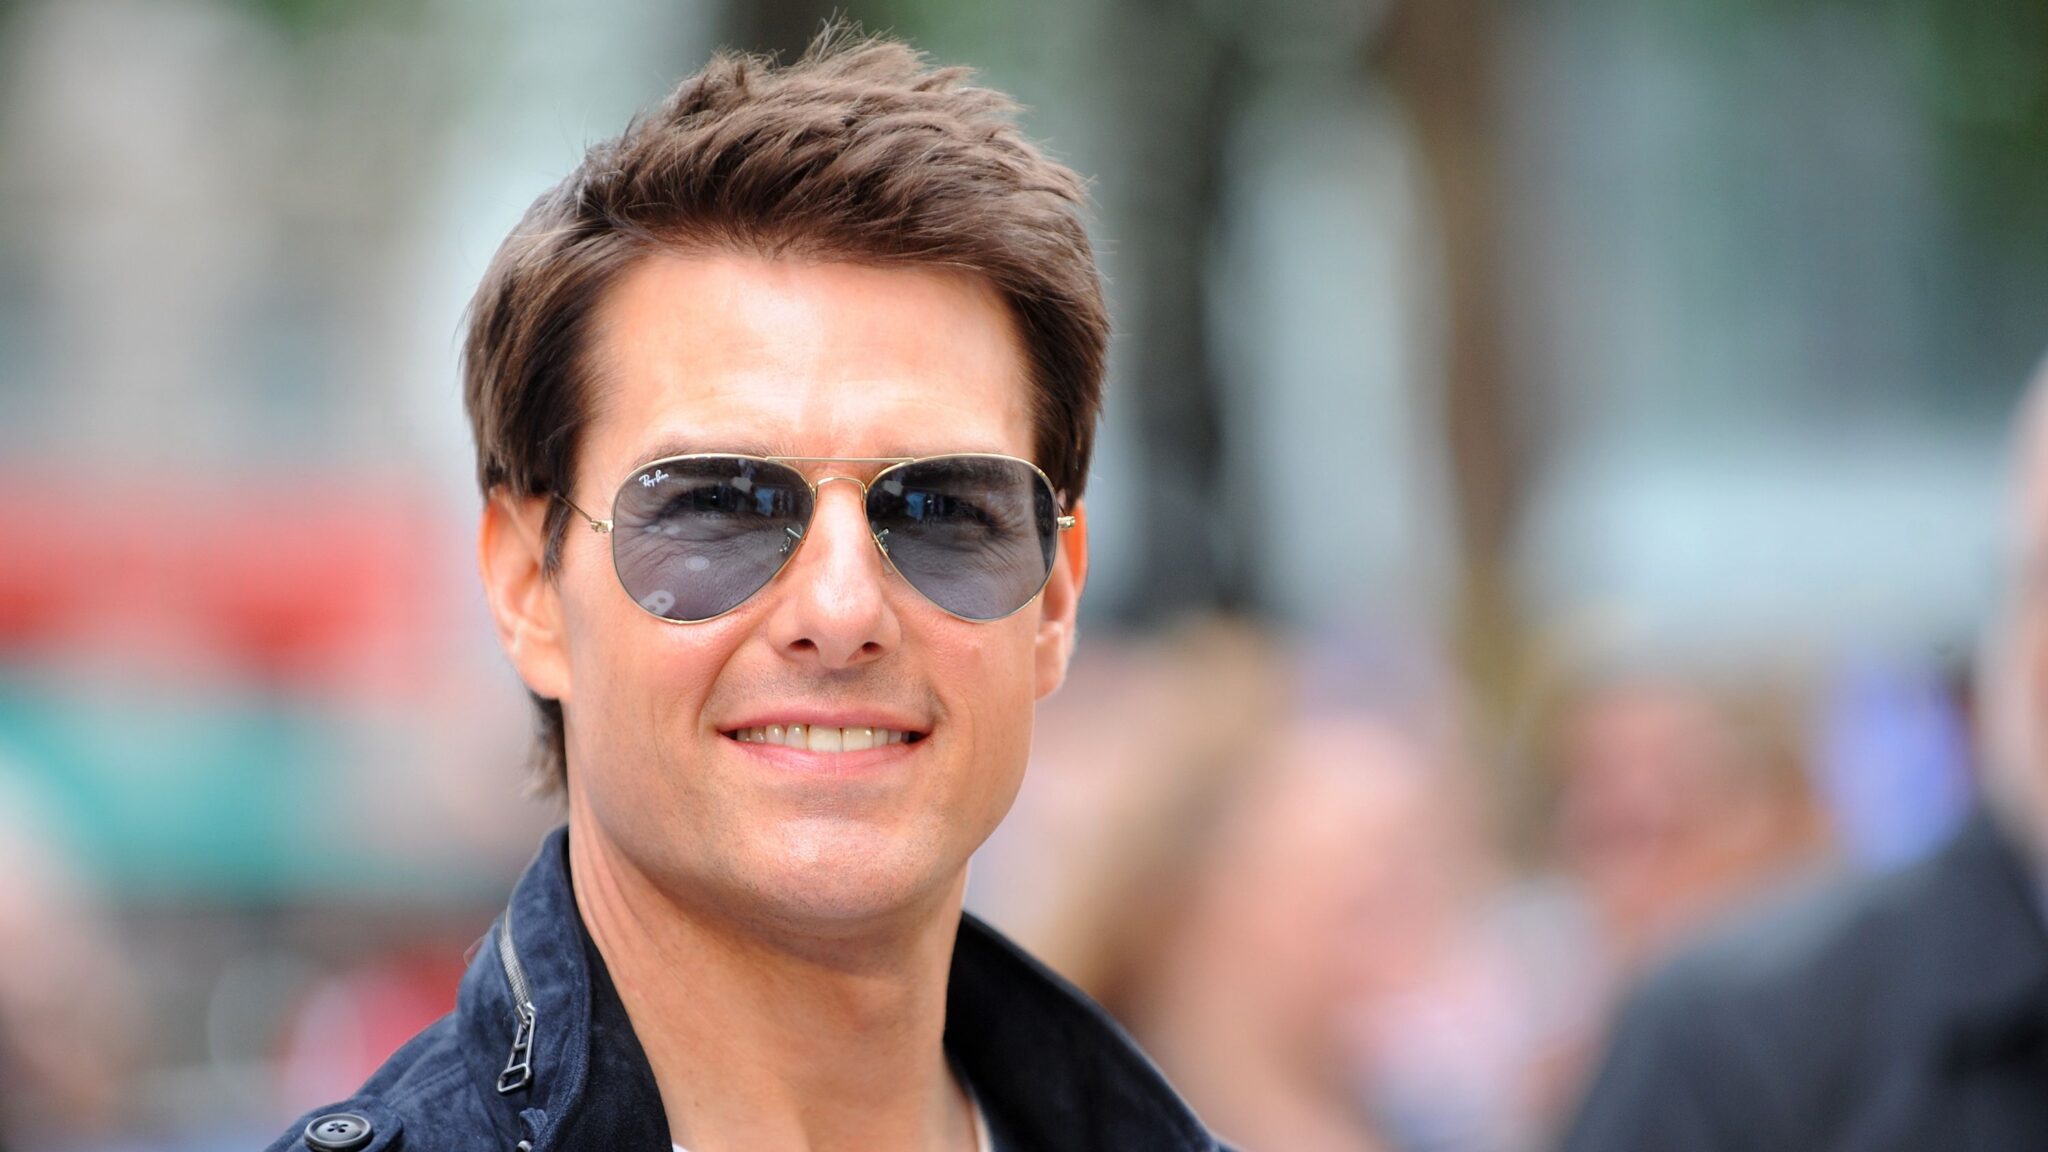 does tom cruise wear reading glasses